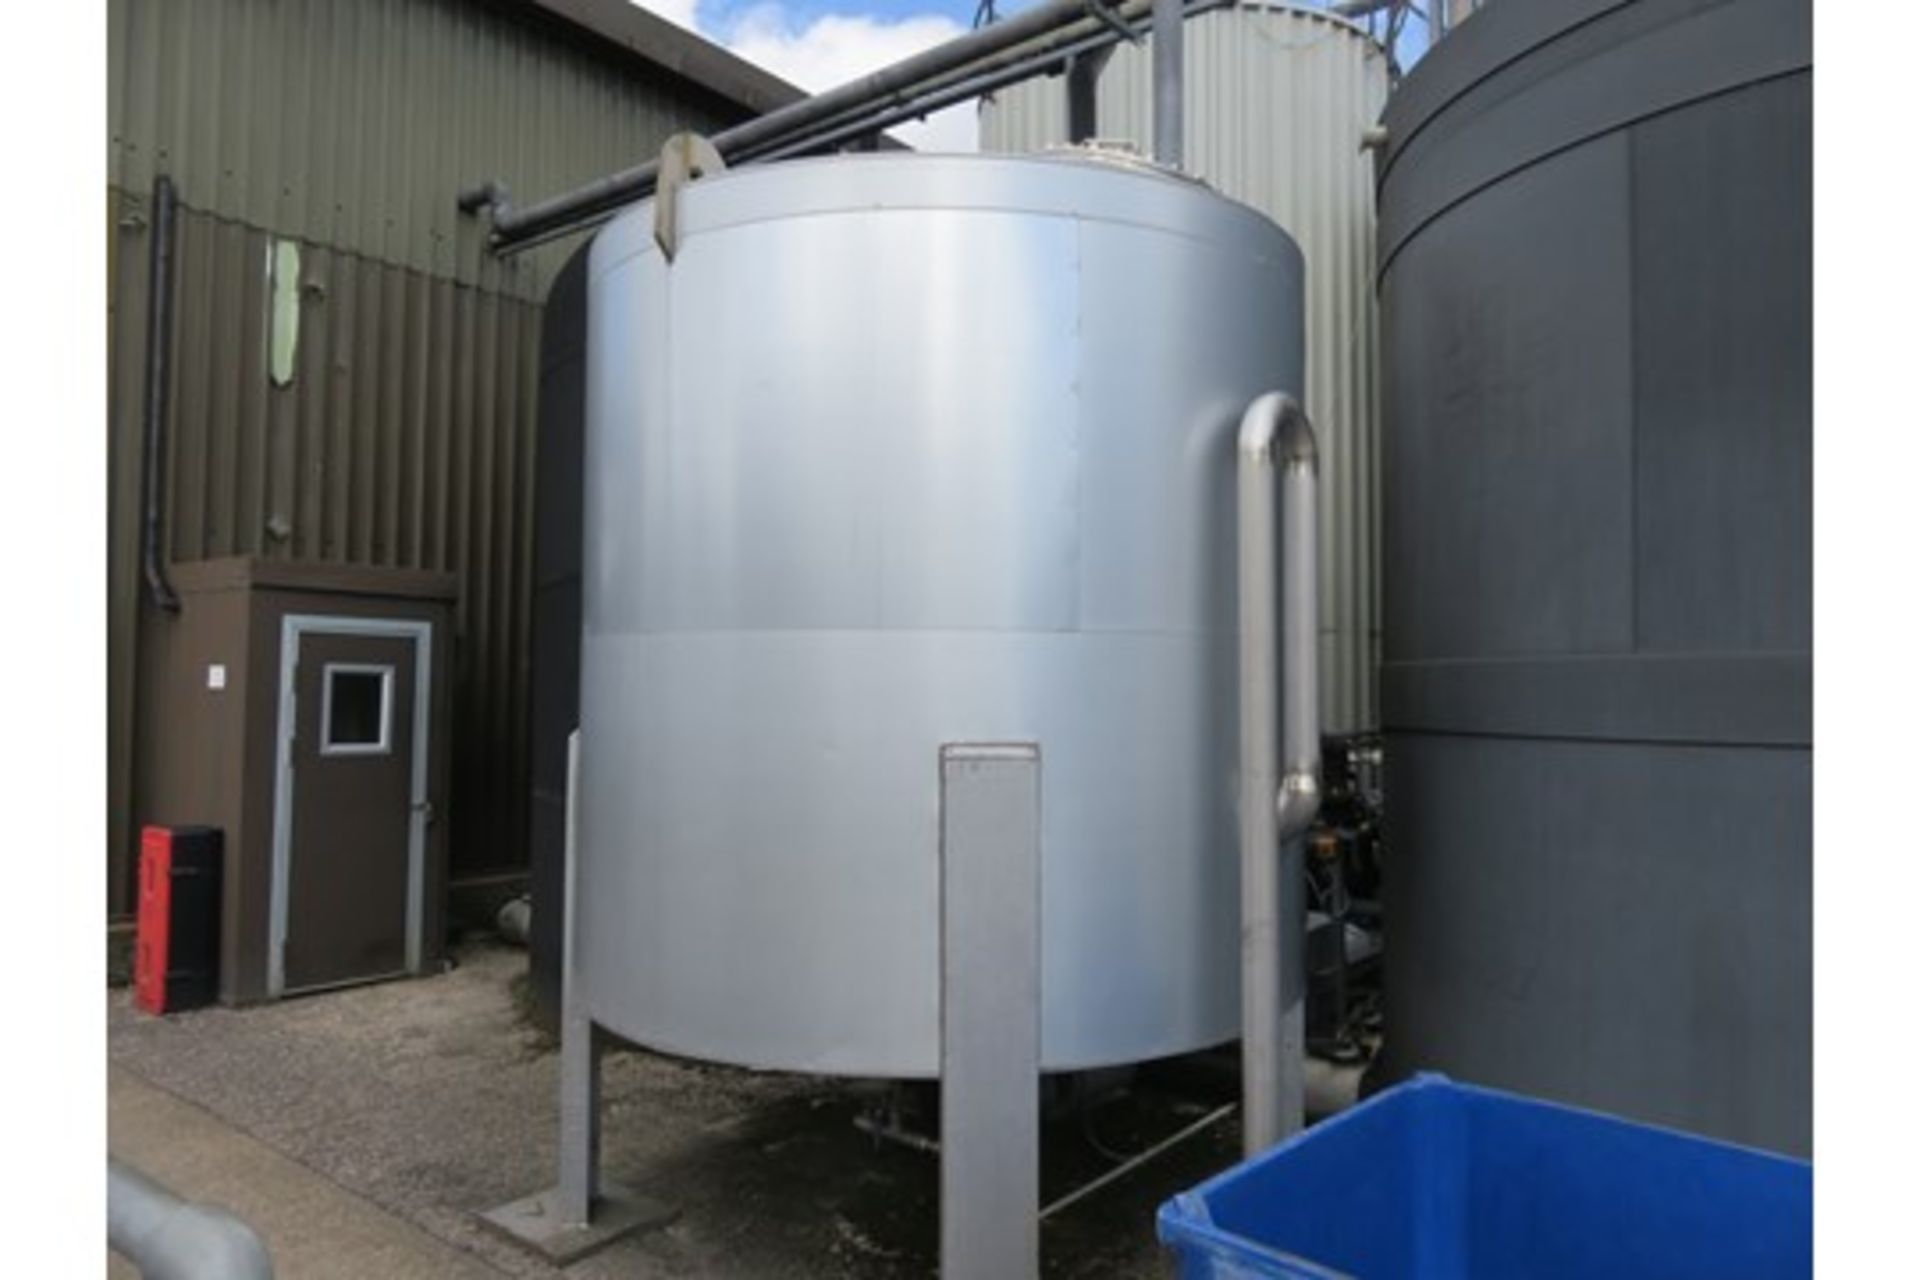 S/s Tank 5,000 litre. Insulated and clad. Lift out £600